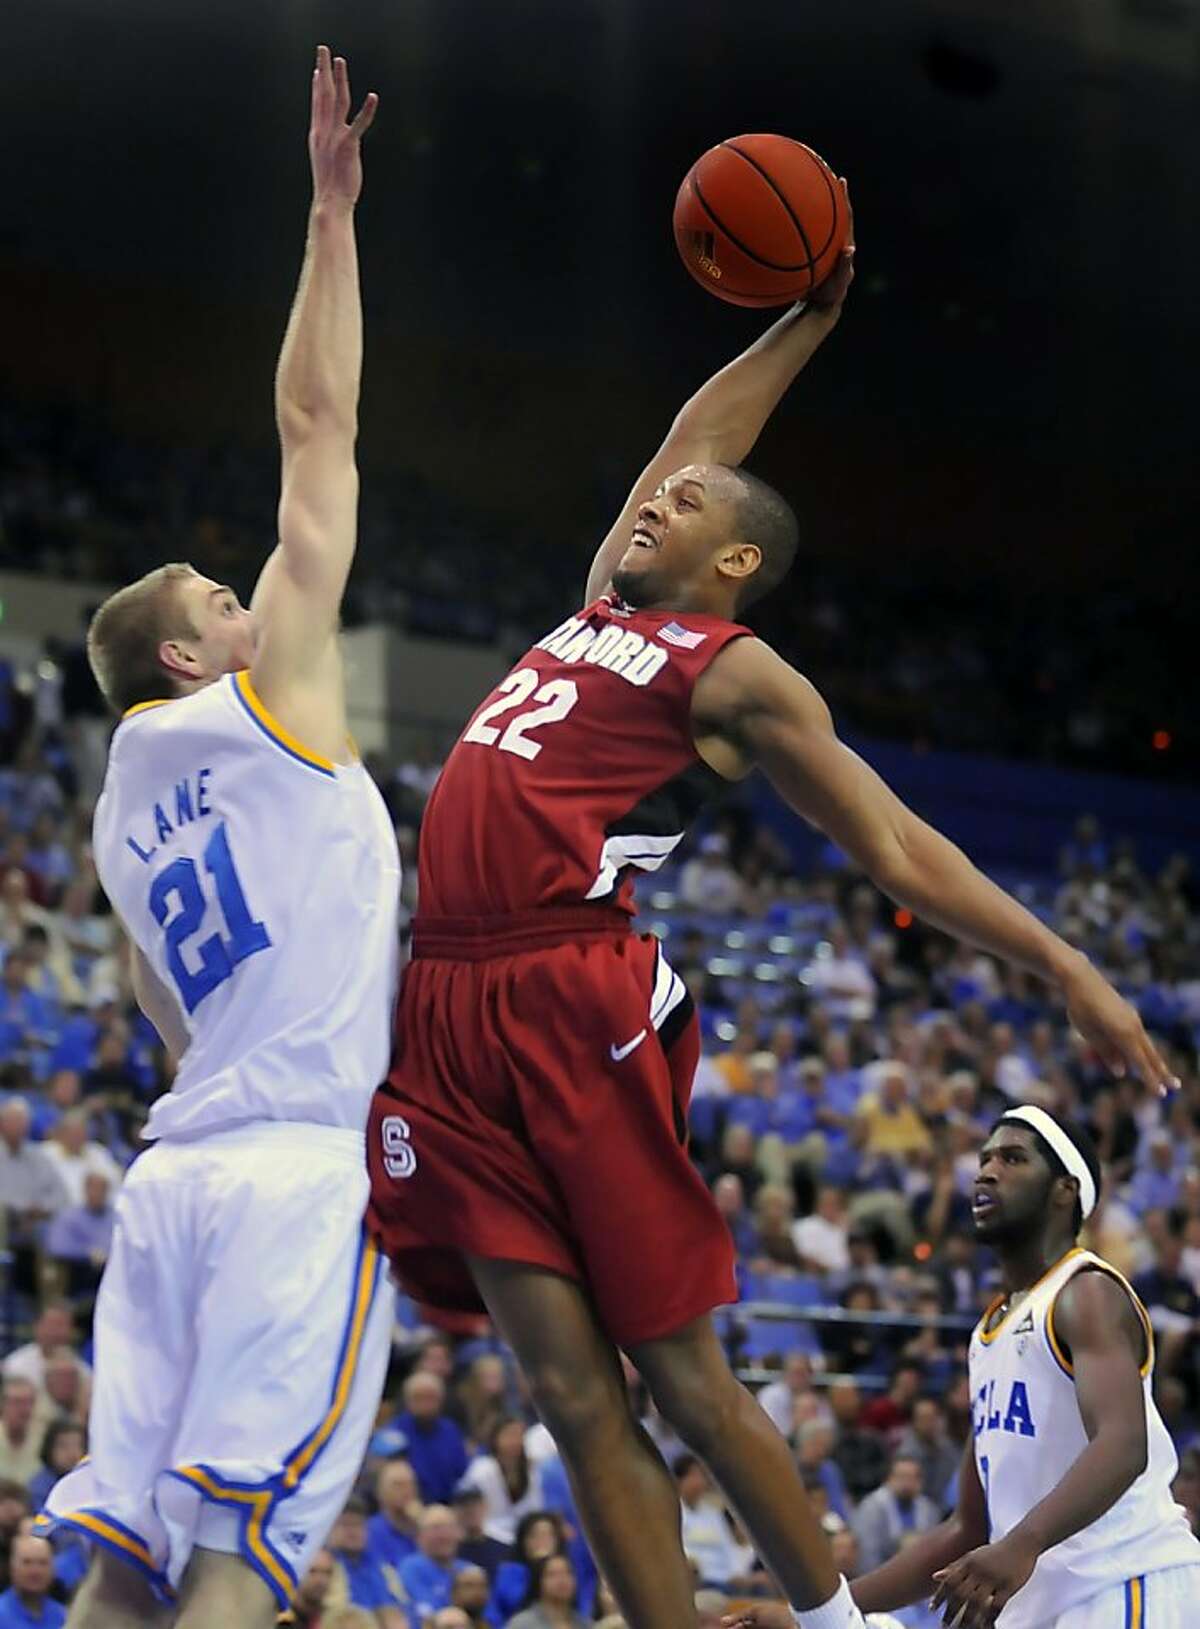 Stanford's Jarrett Mann, right, goes to the basket as UCLA's Brendan Lane defends in the first half of an NCAA college basketball game, Saturday, Jan. 22, 2011, in Los Angeles.